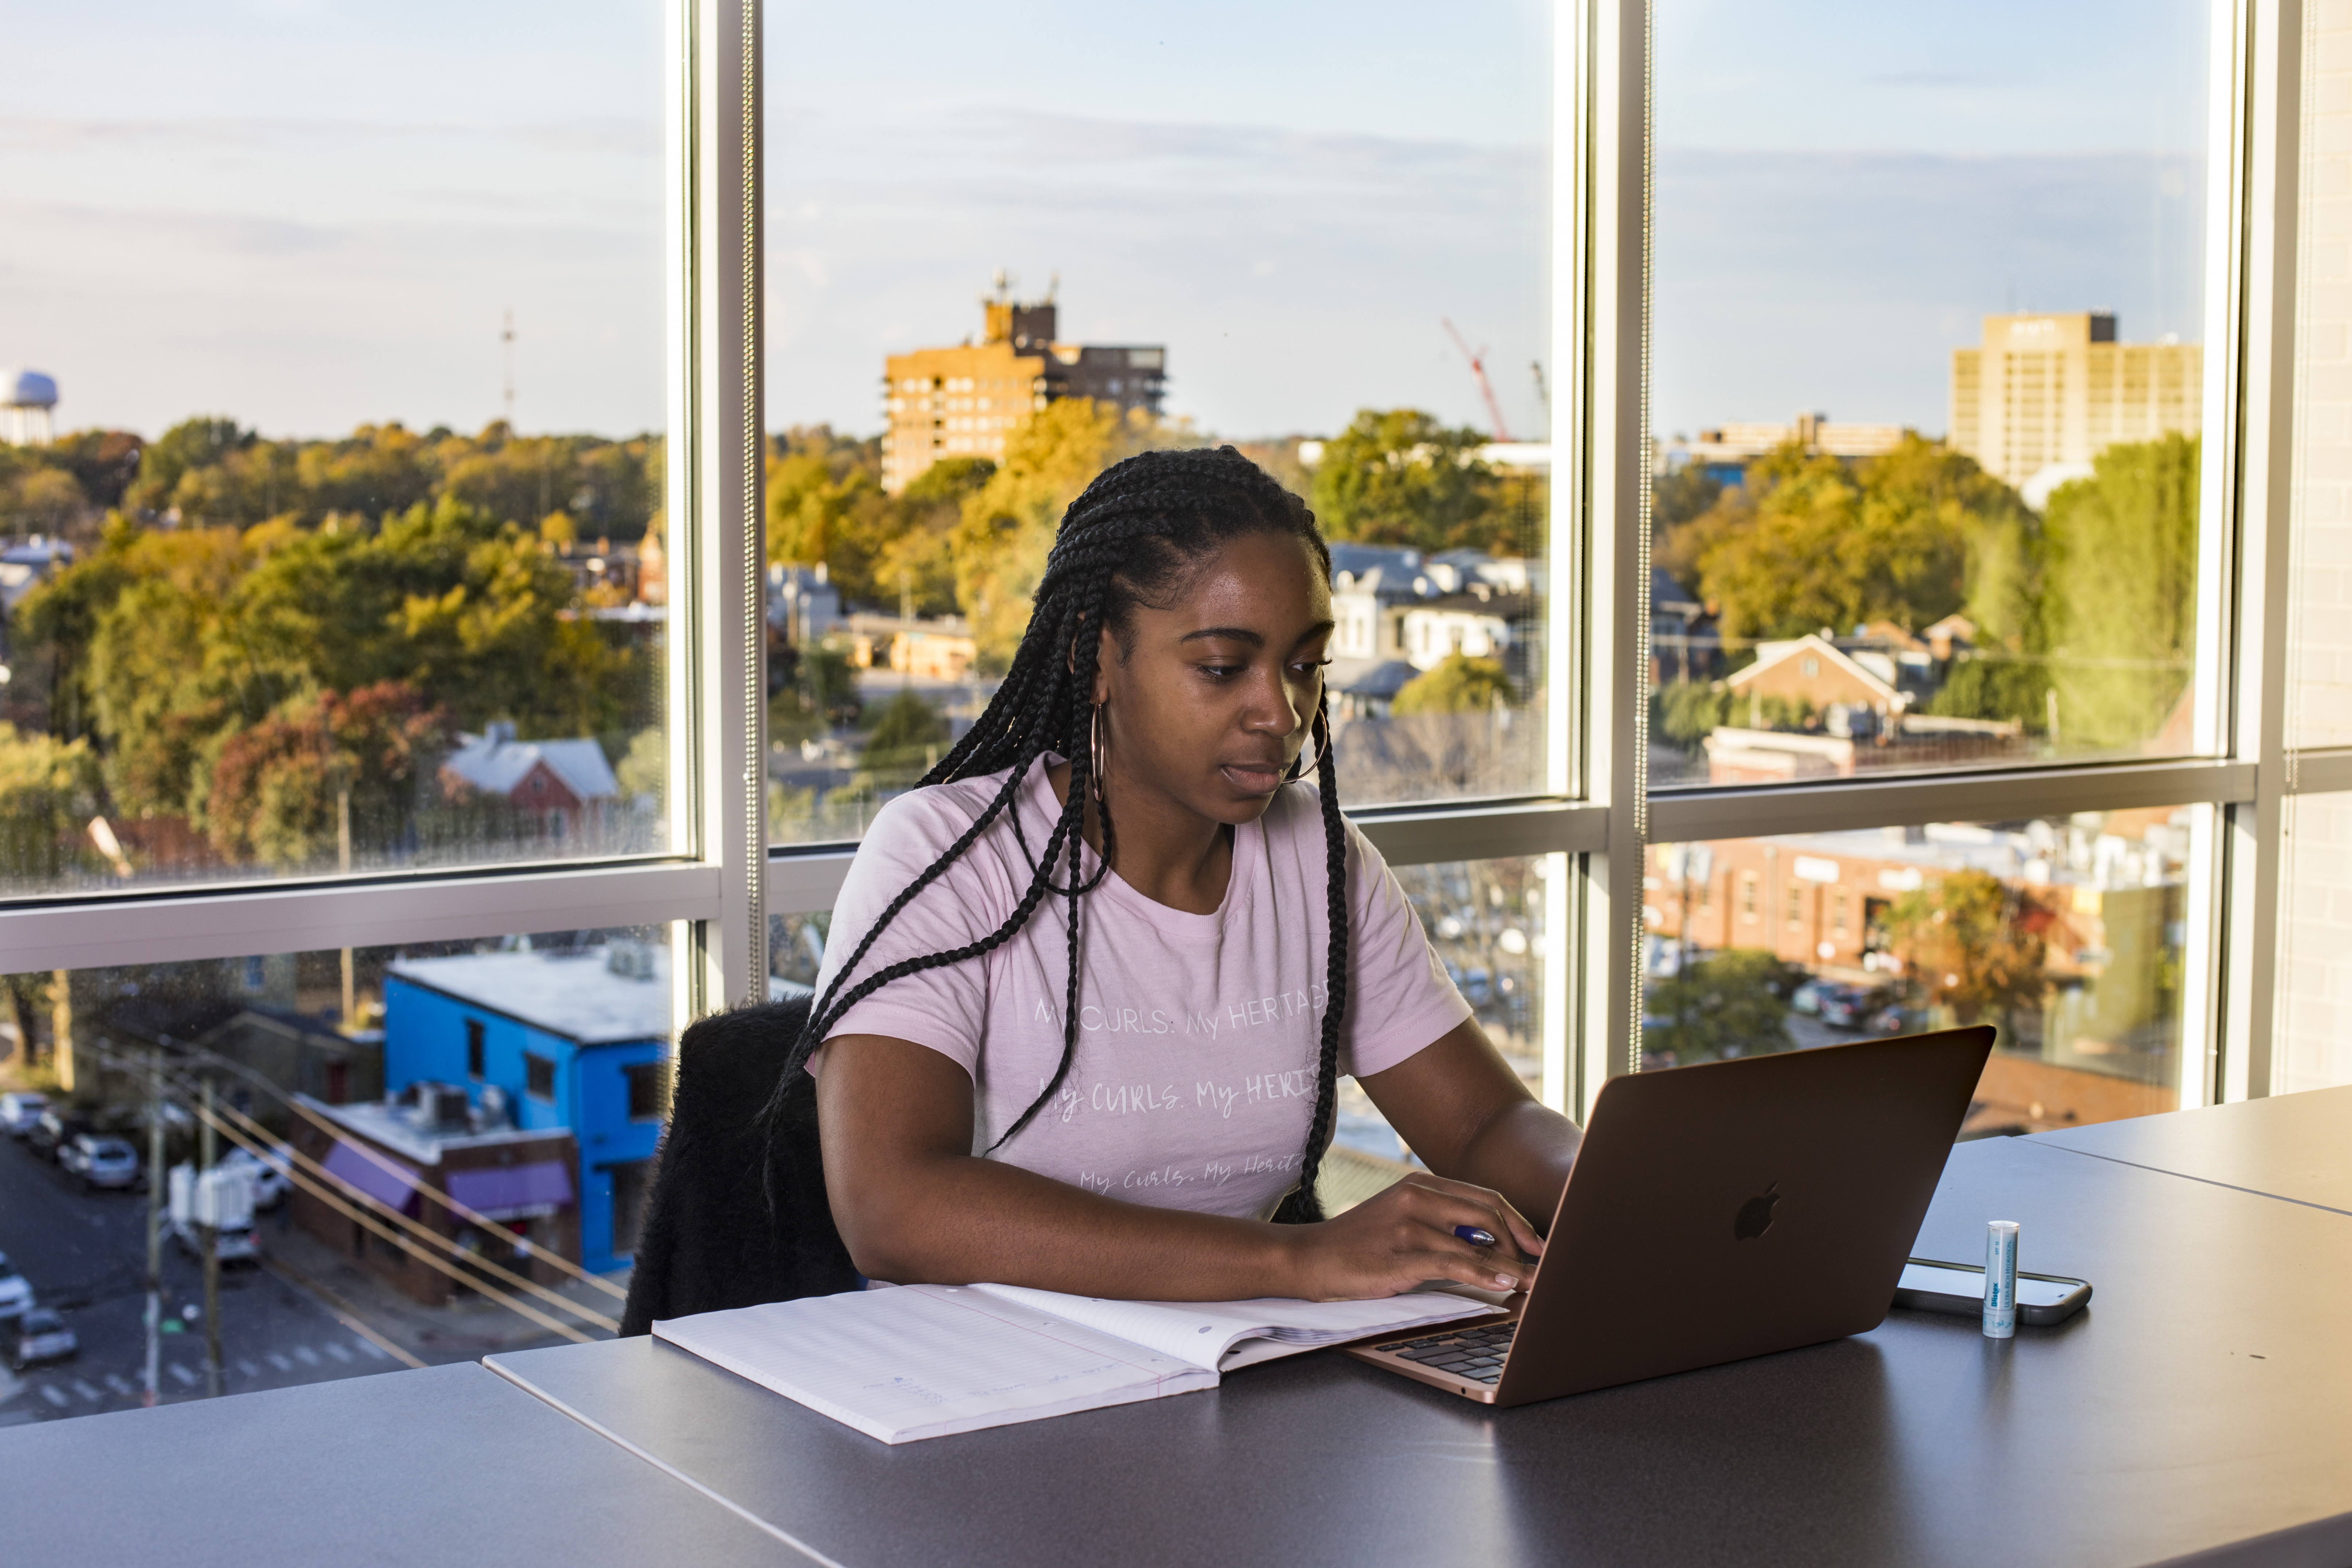 A black female student works at a laptop in her residence hall in front of a large window of campus.